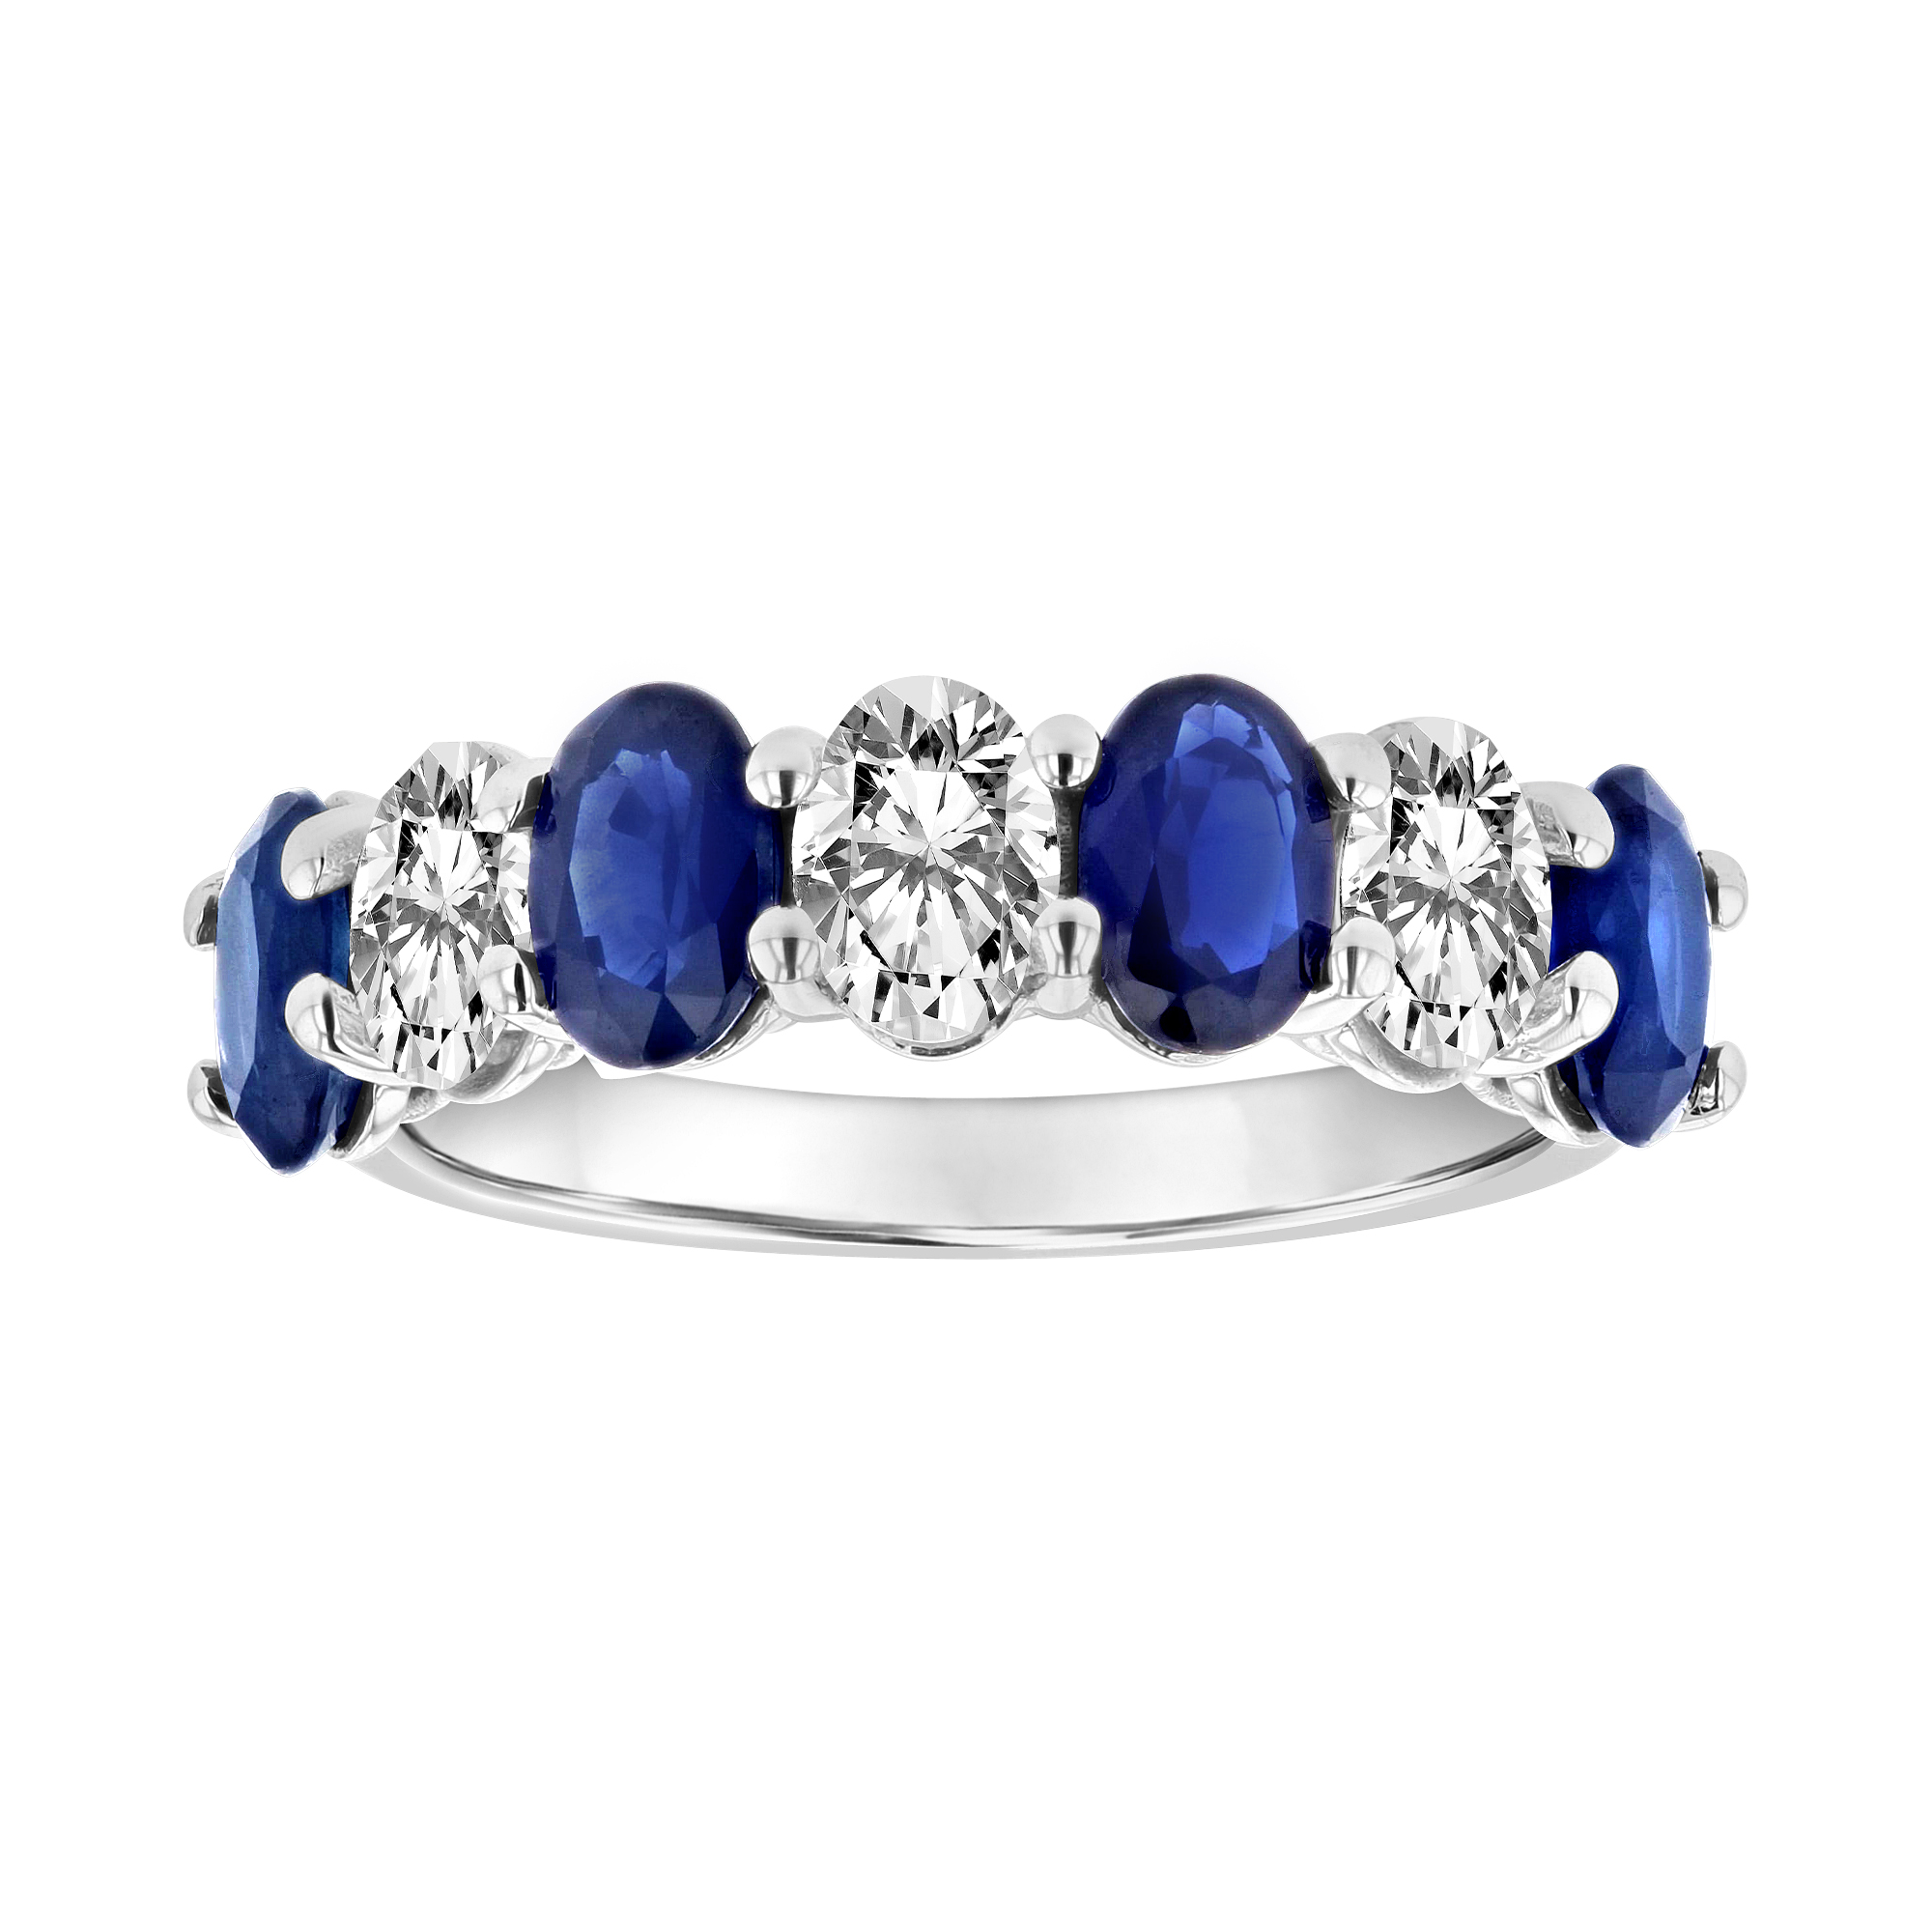 View 2.90ctw Diamond and Sapphire Band in 14k White Gold 